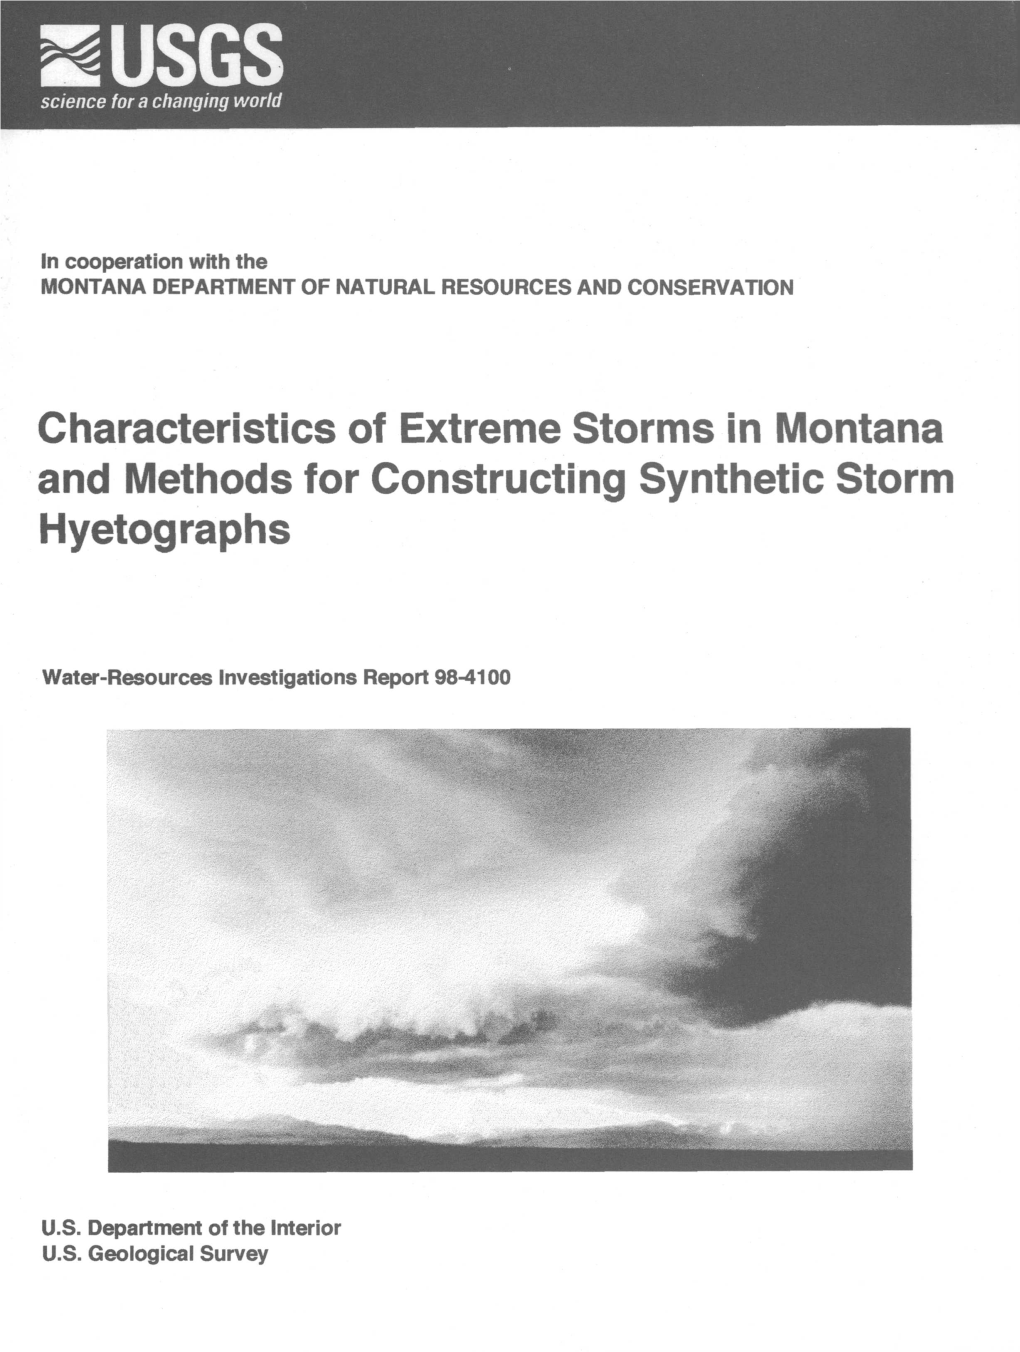 Characteristics of Extreme Storms in Montana and Methods for Constructing Synthetic Storm Hyetographs